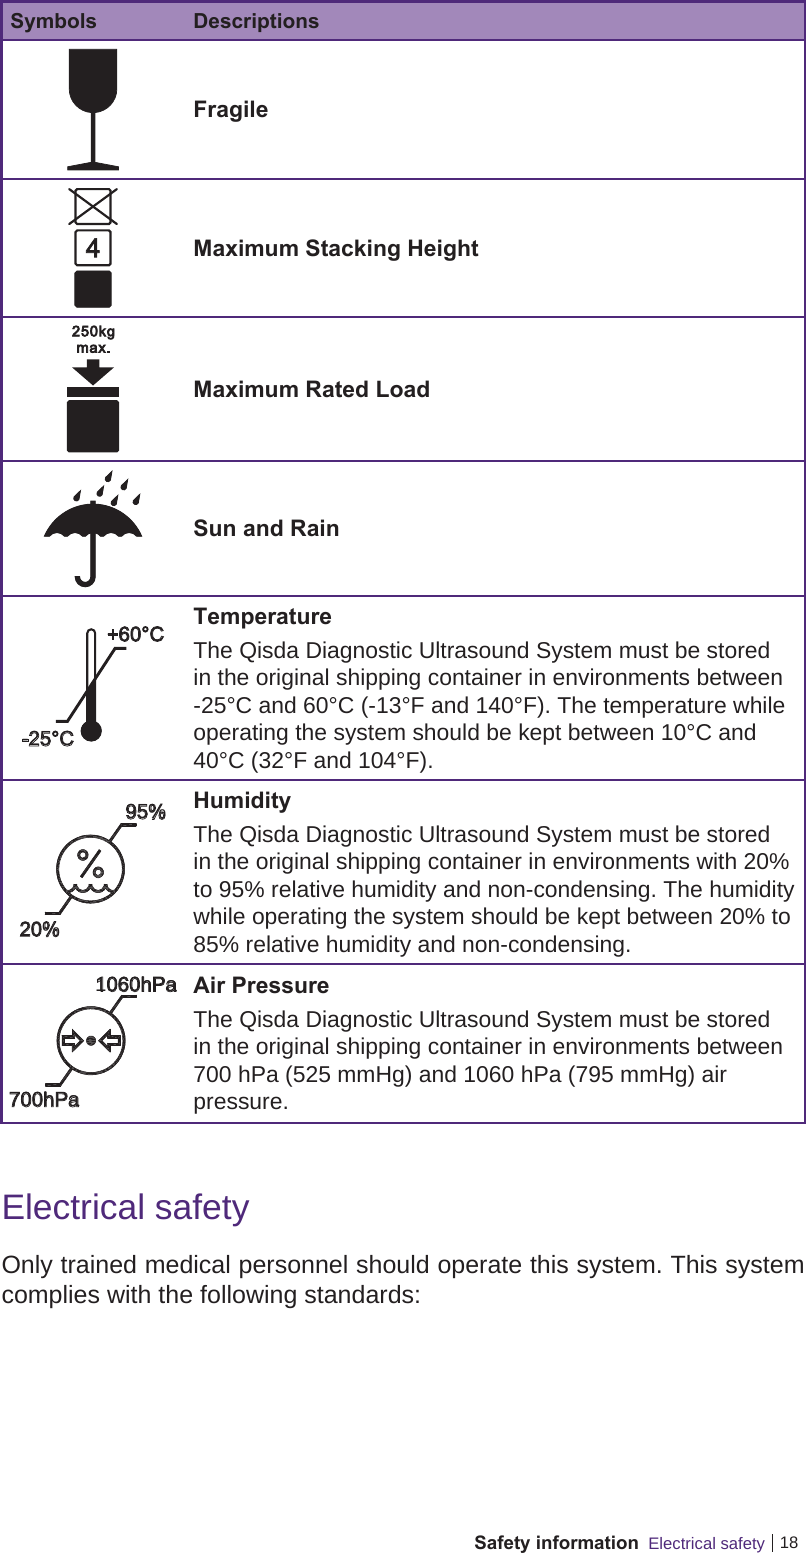 18Safety information  Electrical safetySymbols DescriptionsFragileMaximum Stacking HeightMaximum Rated LoadSun and Rain-25°C+60°CTemperatureThe Qisda Diagnostic Ultrasound System must be stored in the original shipping container in environments between -25°C and 60°C (-13°F and 140°F). The temperature while operating the system should be kept between 10°C and 40°C (32°F and 104°F).20%95%HumidityThe Qisda Diagnostic Ultrasound System must be stored in the original shipping container in environments with 20% to 95% relative humidity and non-condensing. The humidity while operating the system should be kept between 20% to 85% relative humidity and non-condensing.1060hPa700hPaAir PressureThe Qisda Diagnostic Ultrasound System must be stored in the original shipping container in environments between 700 hPa (525 mmHg) and 1060 hPa (795 mmHg) air pressure.Electrical safetyOnly trained medical personnel should operate this system. This system complies with the following standards: